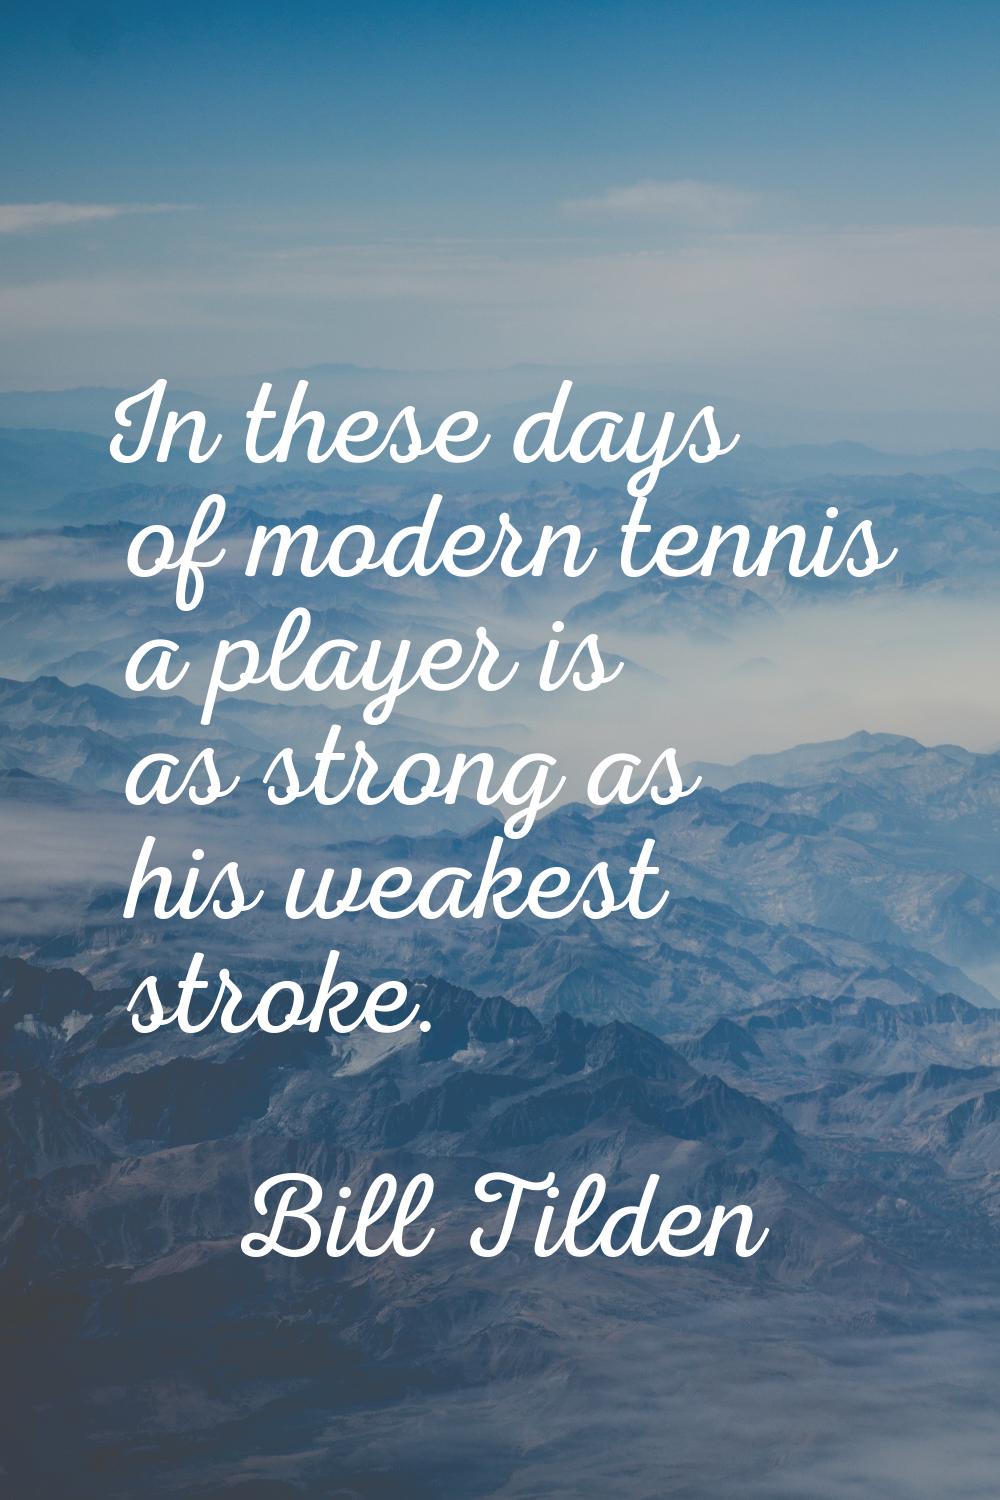 In these days of modern tennis a player is as strong as his weakest stroke.